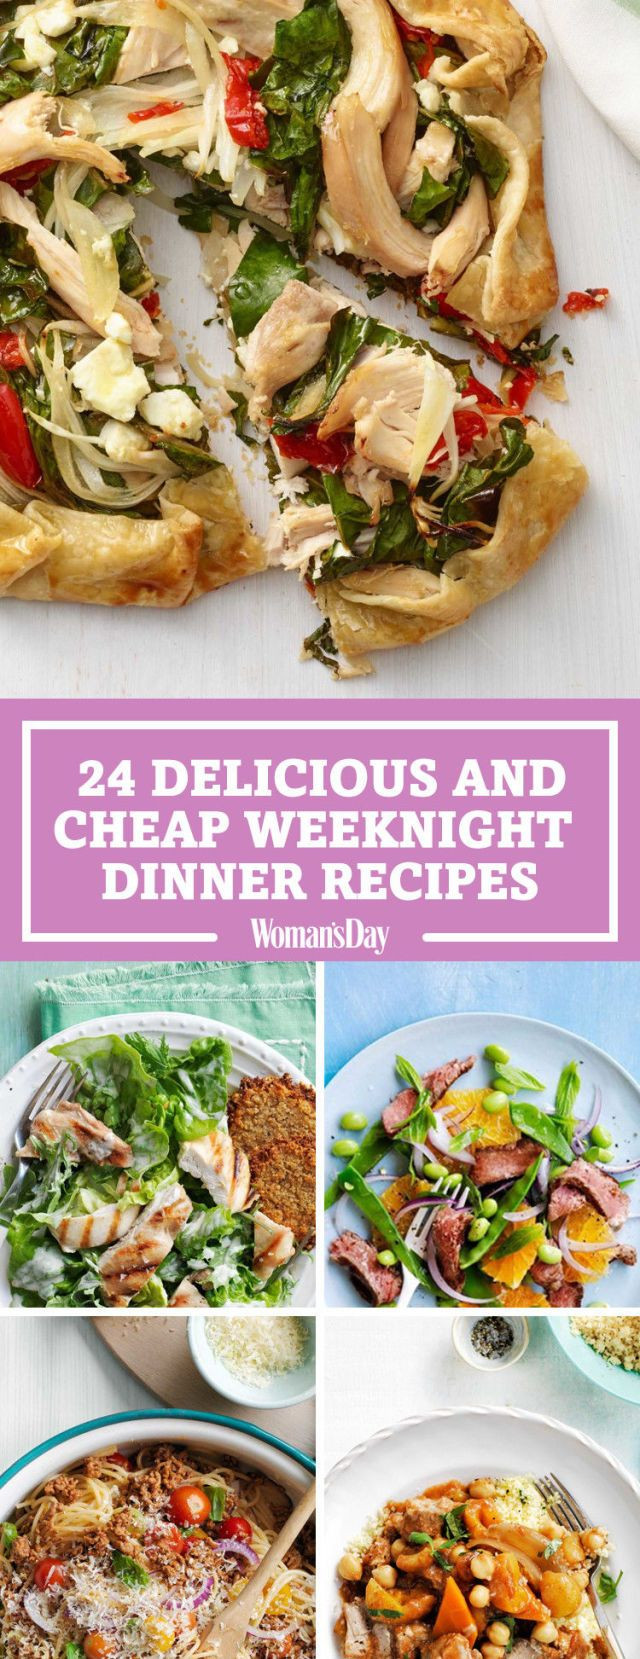 Budget Dinner Ideas
 100 Cheap Dinner Ideas – Easy Recipes for Inexpensive Meals